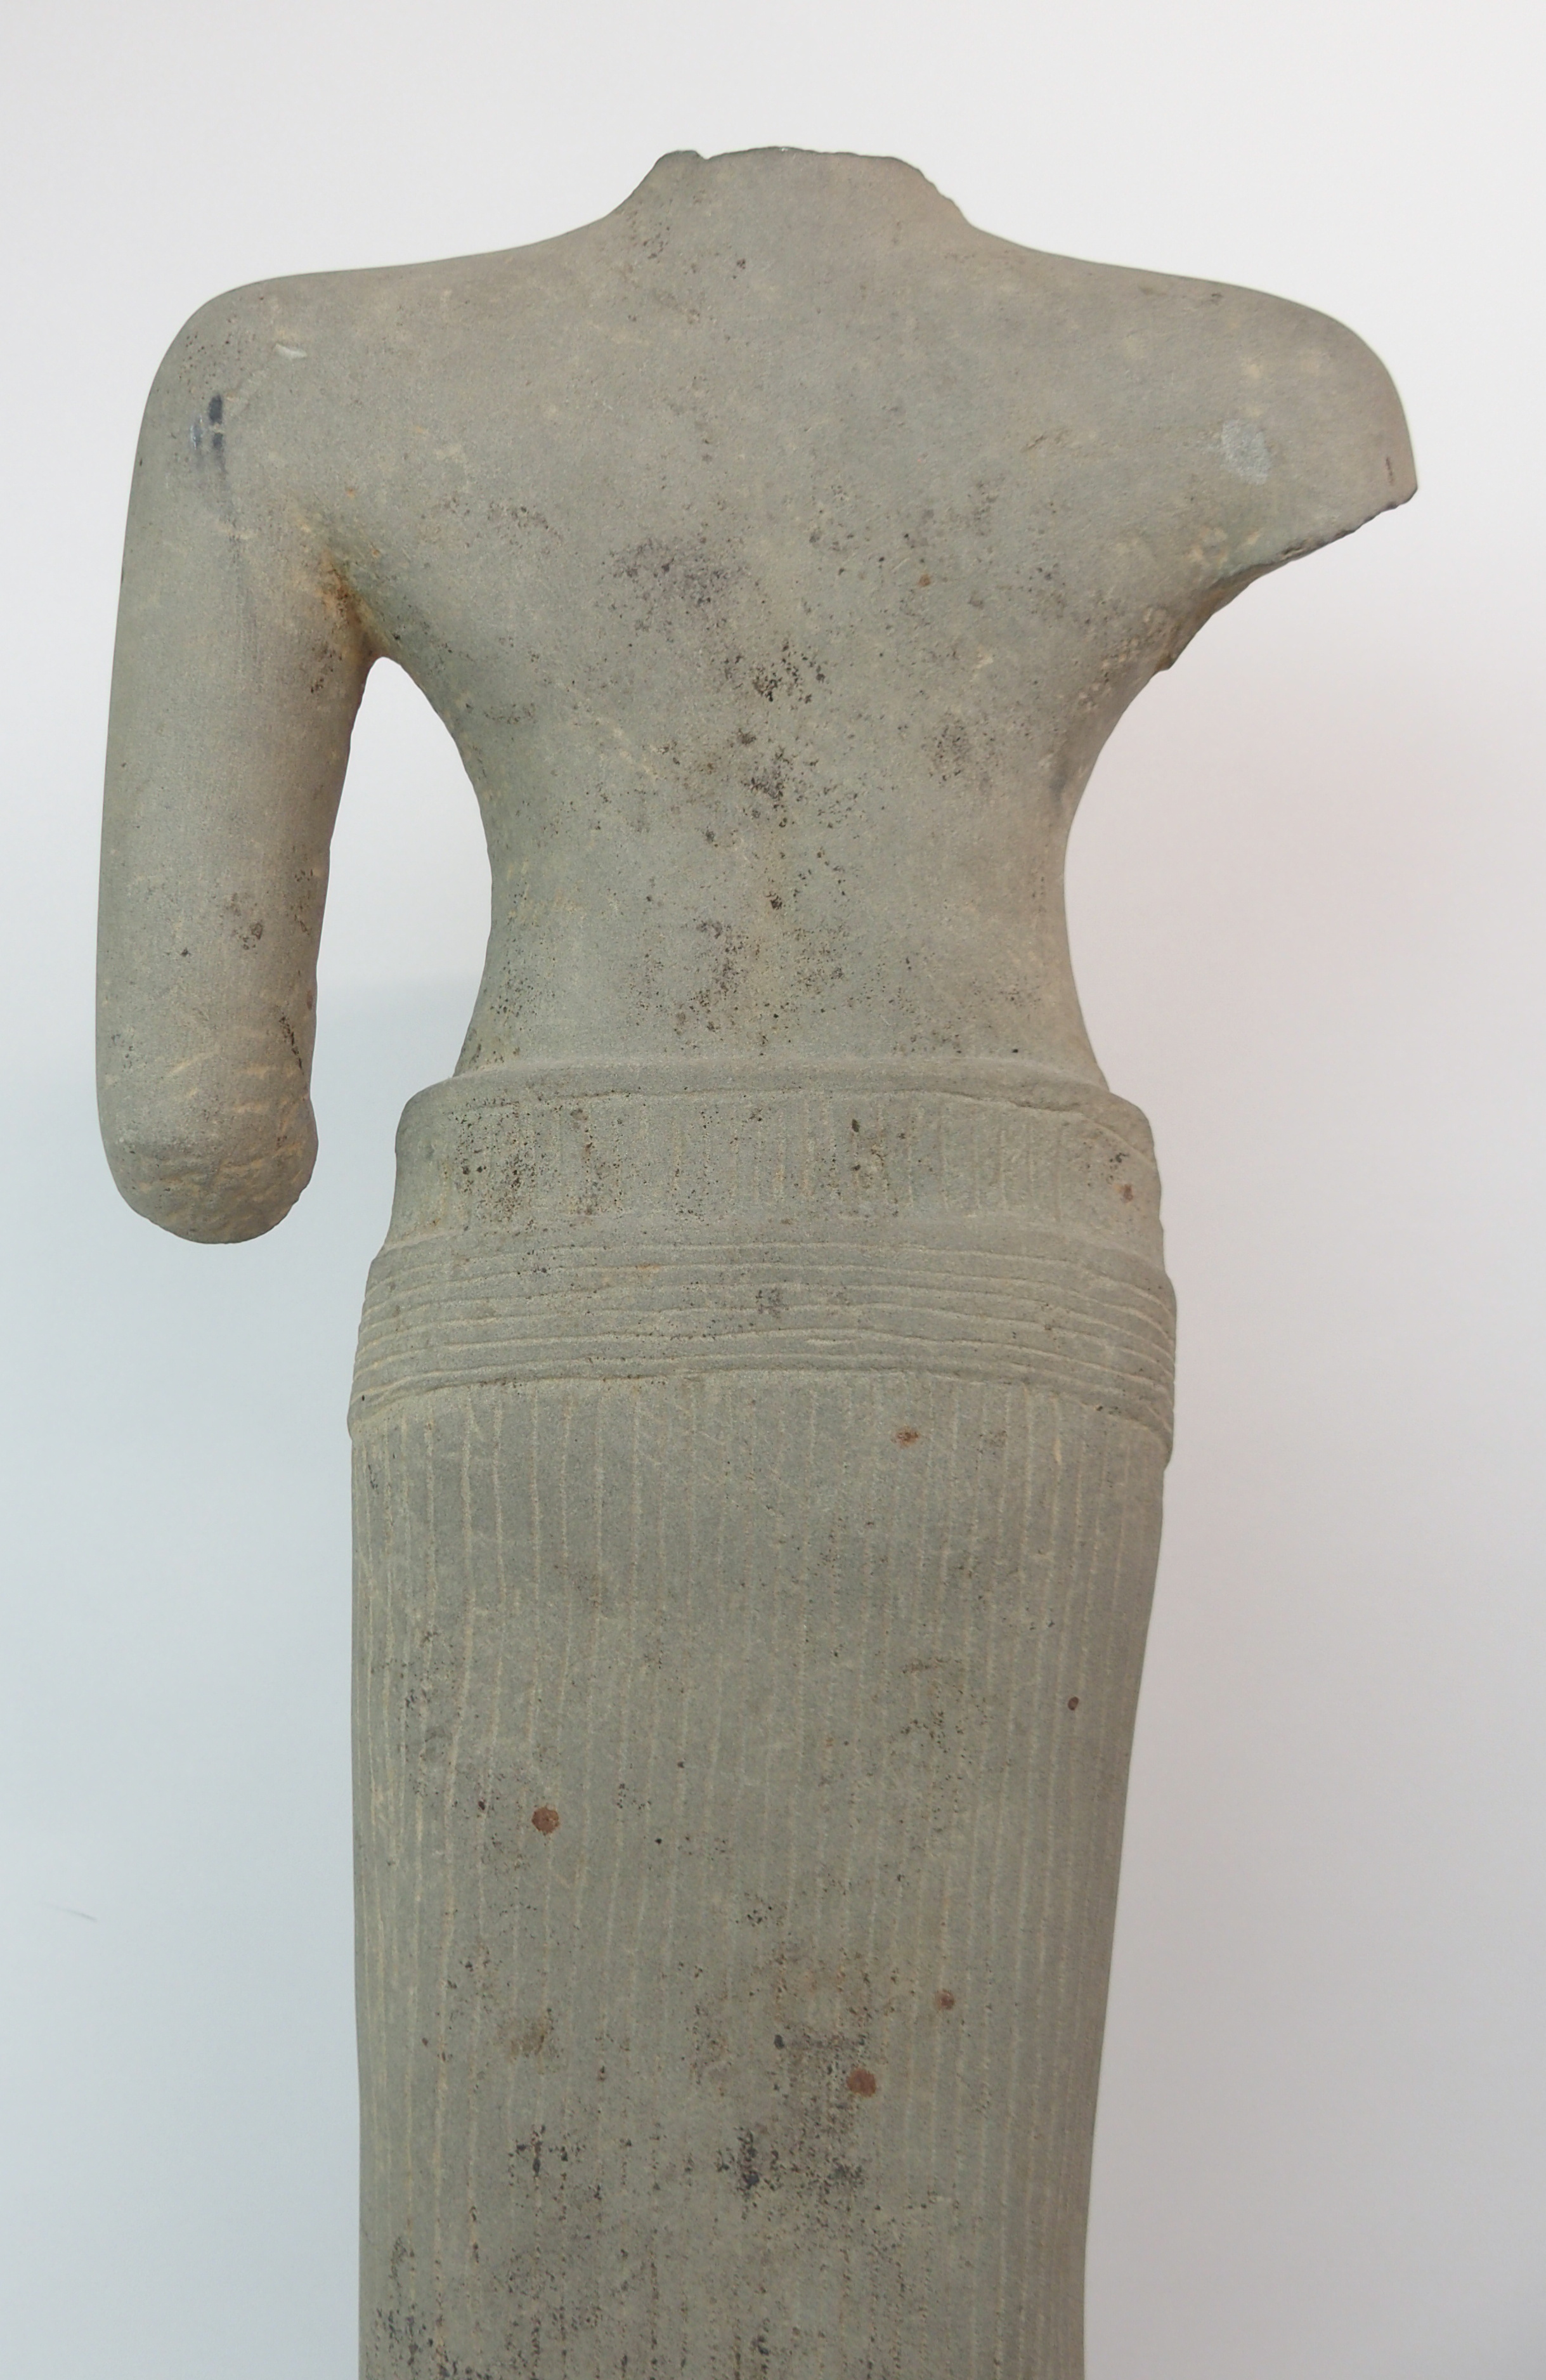 AN ASIAN STONE CARVING OF A FEMALE TORSO bare chested and wearing a ribbon tied patterned dress, ( - Image 9 of 10